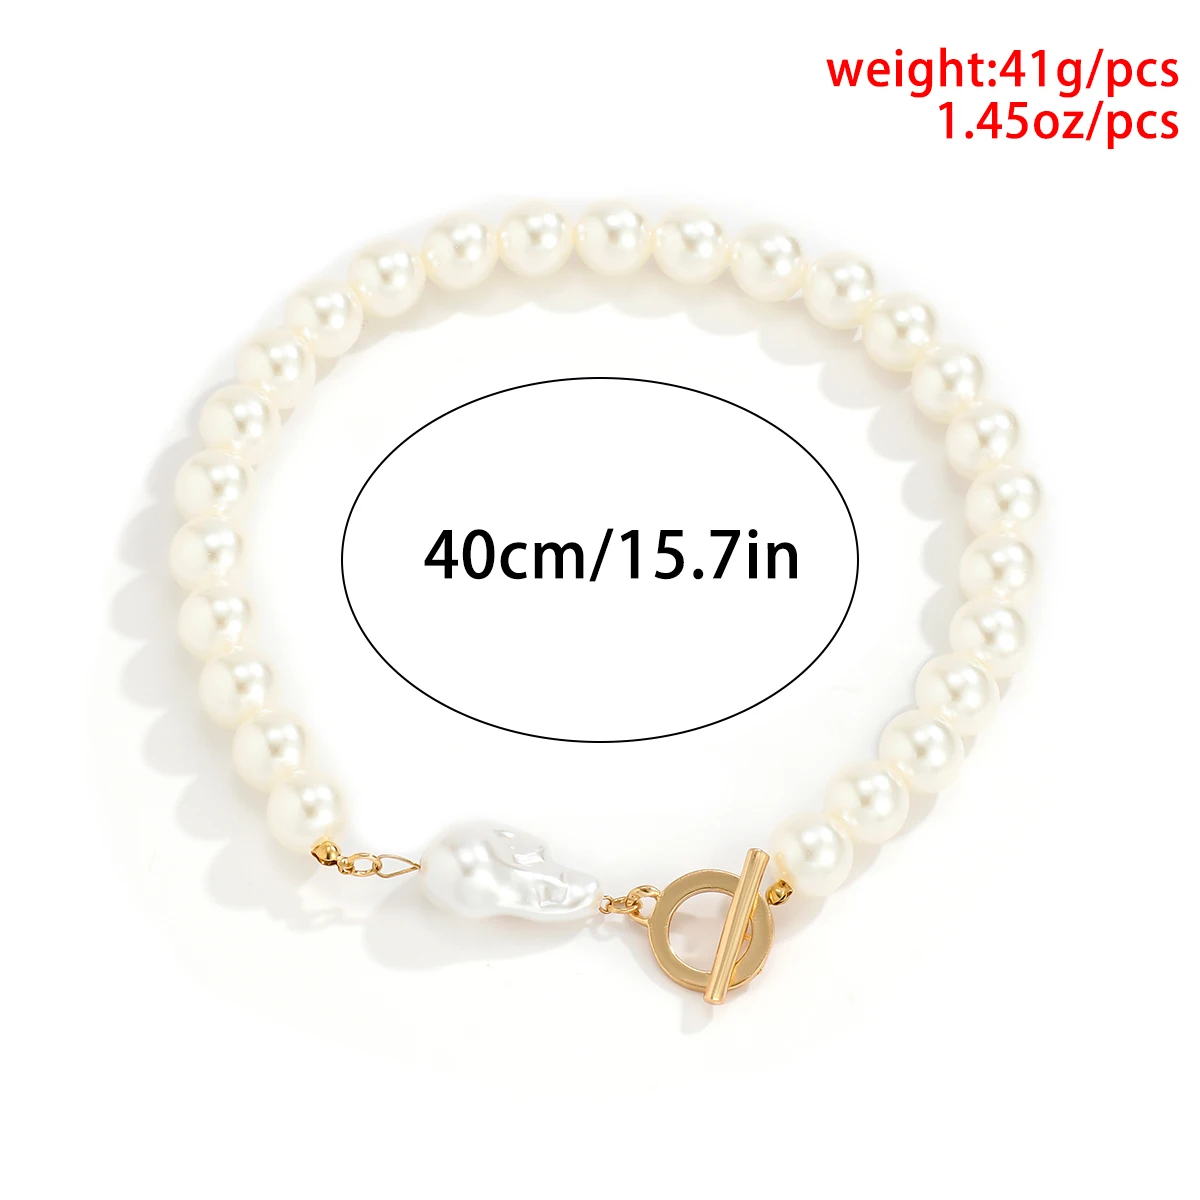 

Vintage Elegant Baroque Simulated Pearls Beaded Chain Choker Necklace For Women Fashion Geometric Round Toggle Clasp Jewelry